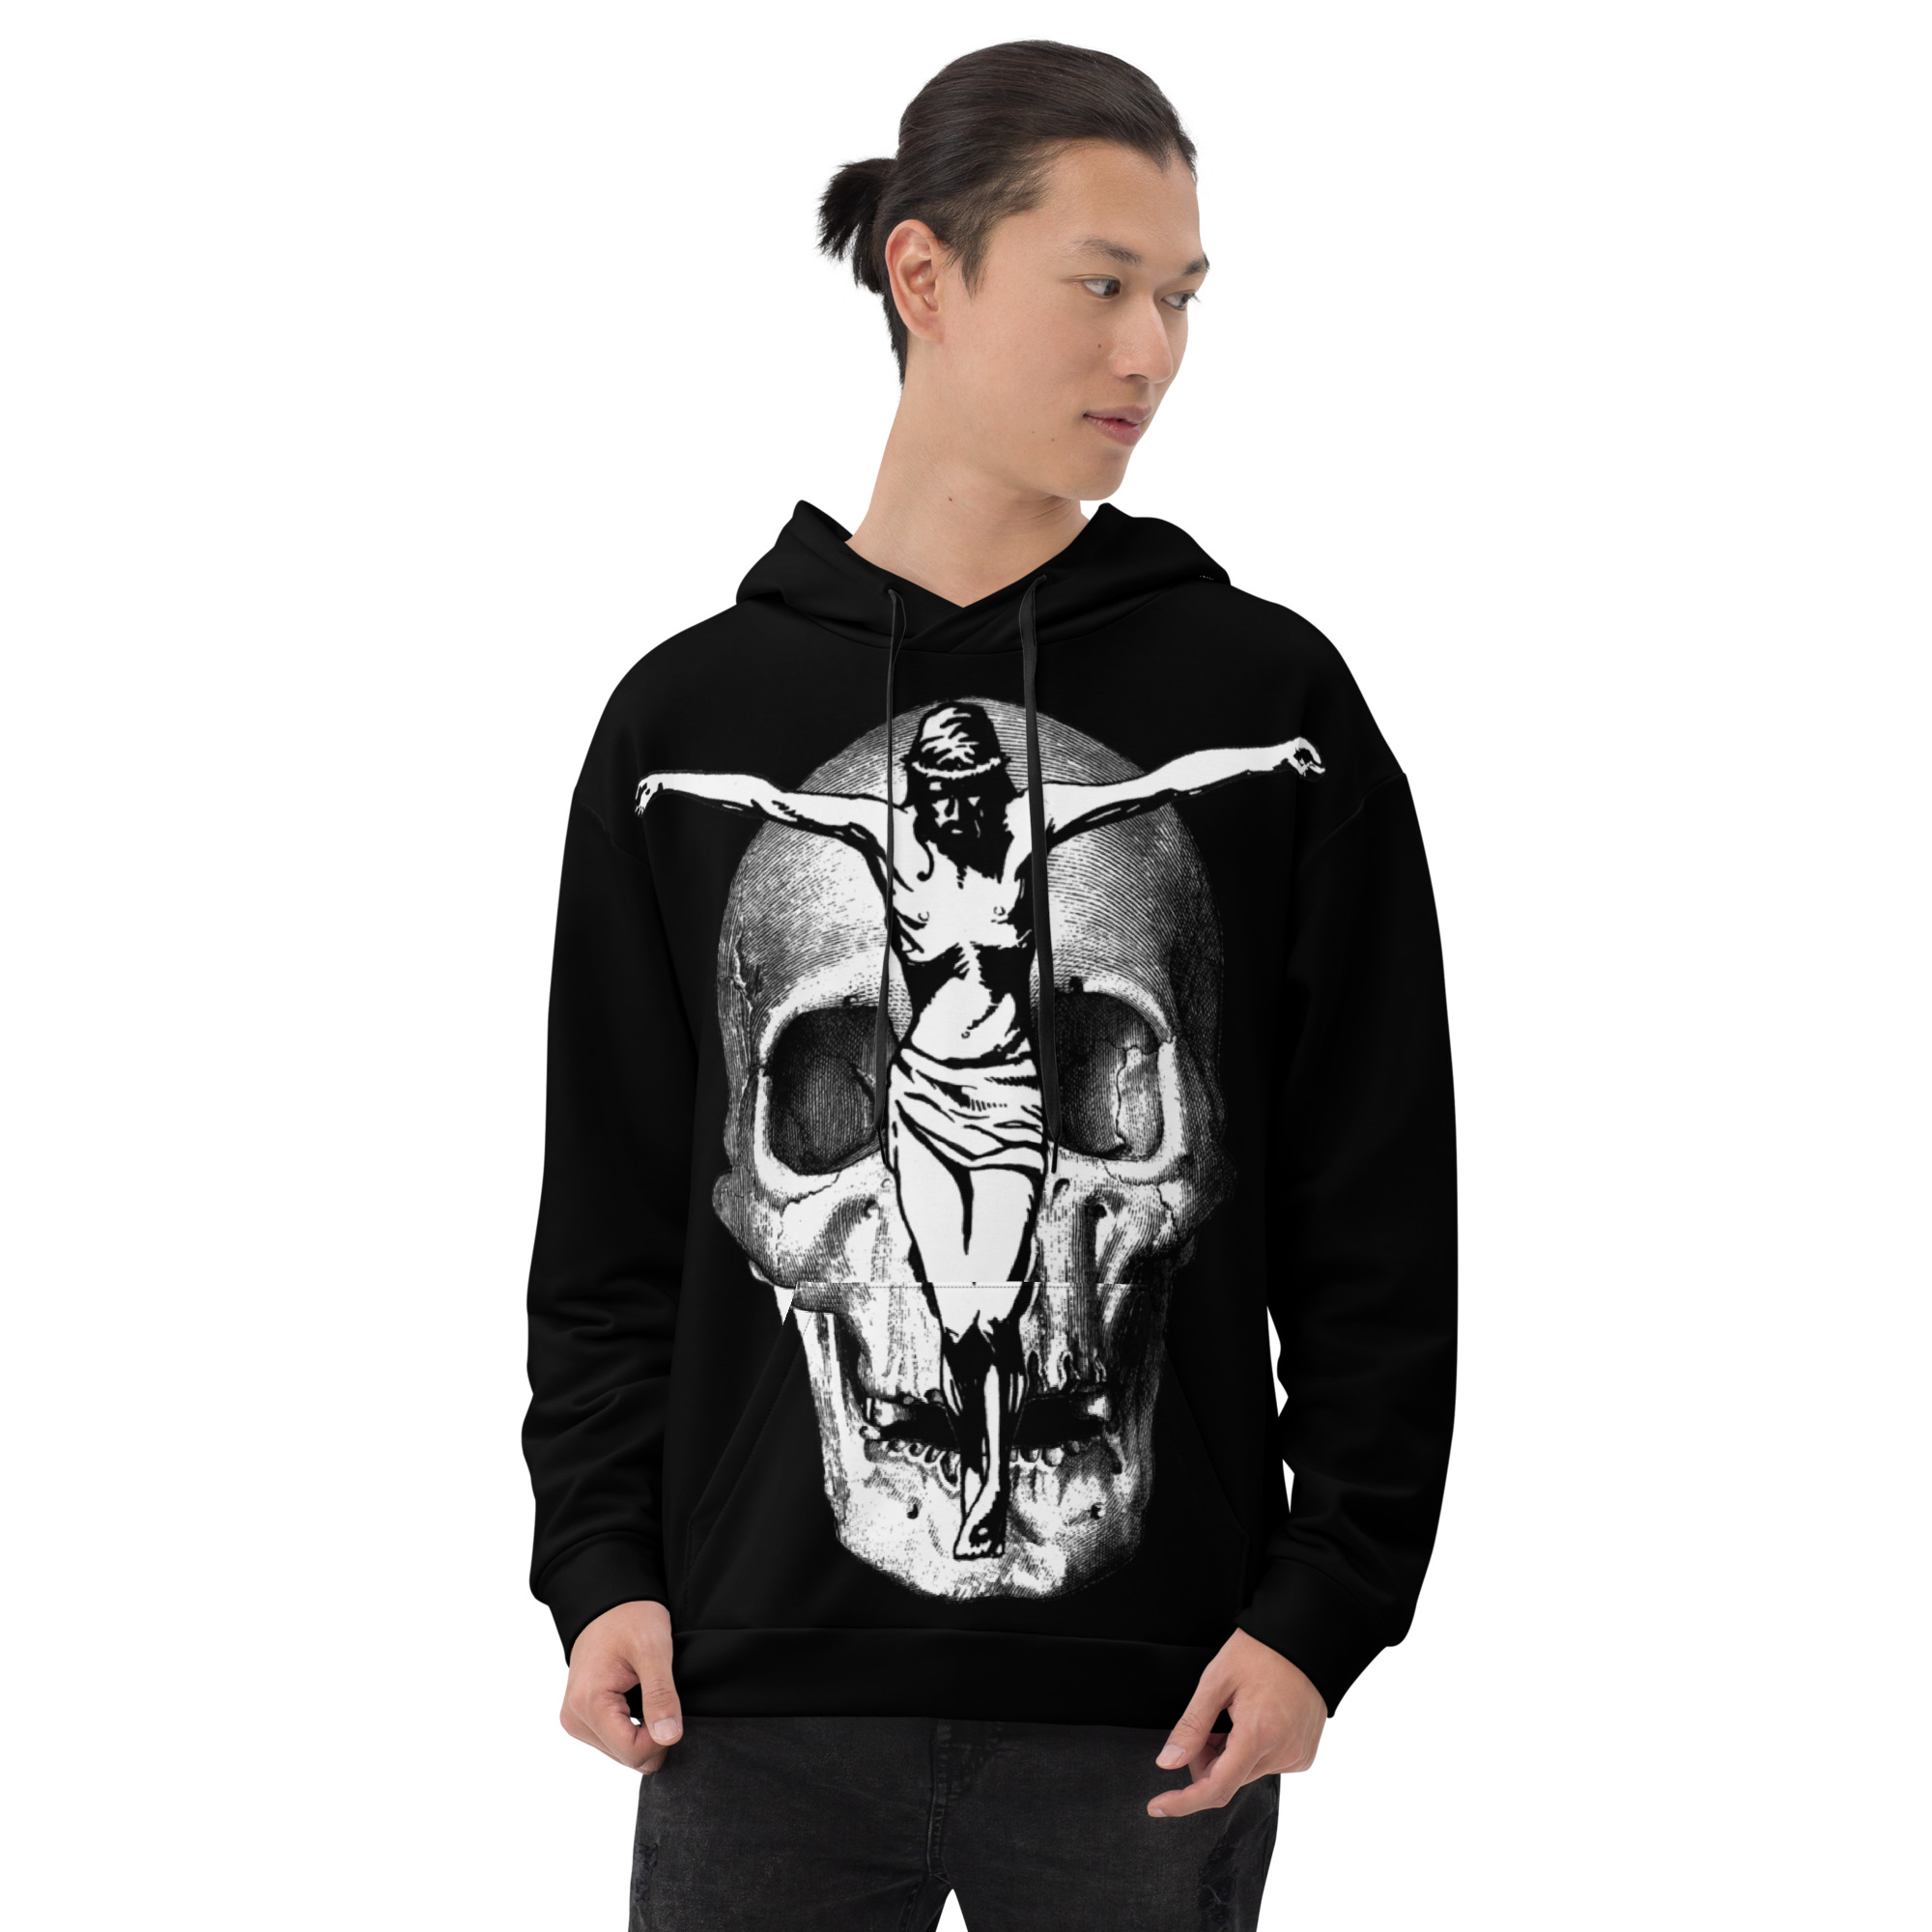 all-over-print-unisex-hoodie-white-front-6439c3f17a68d.jpg